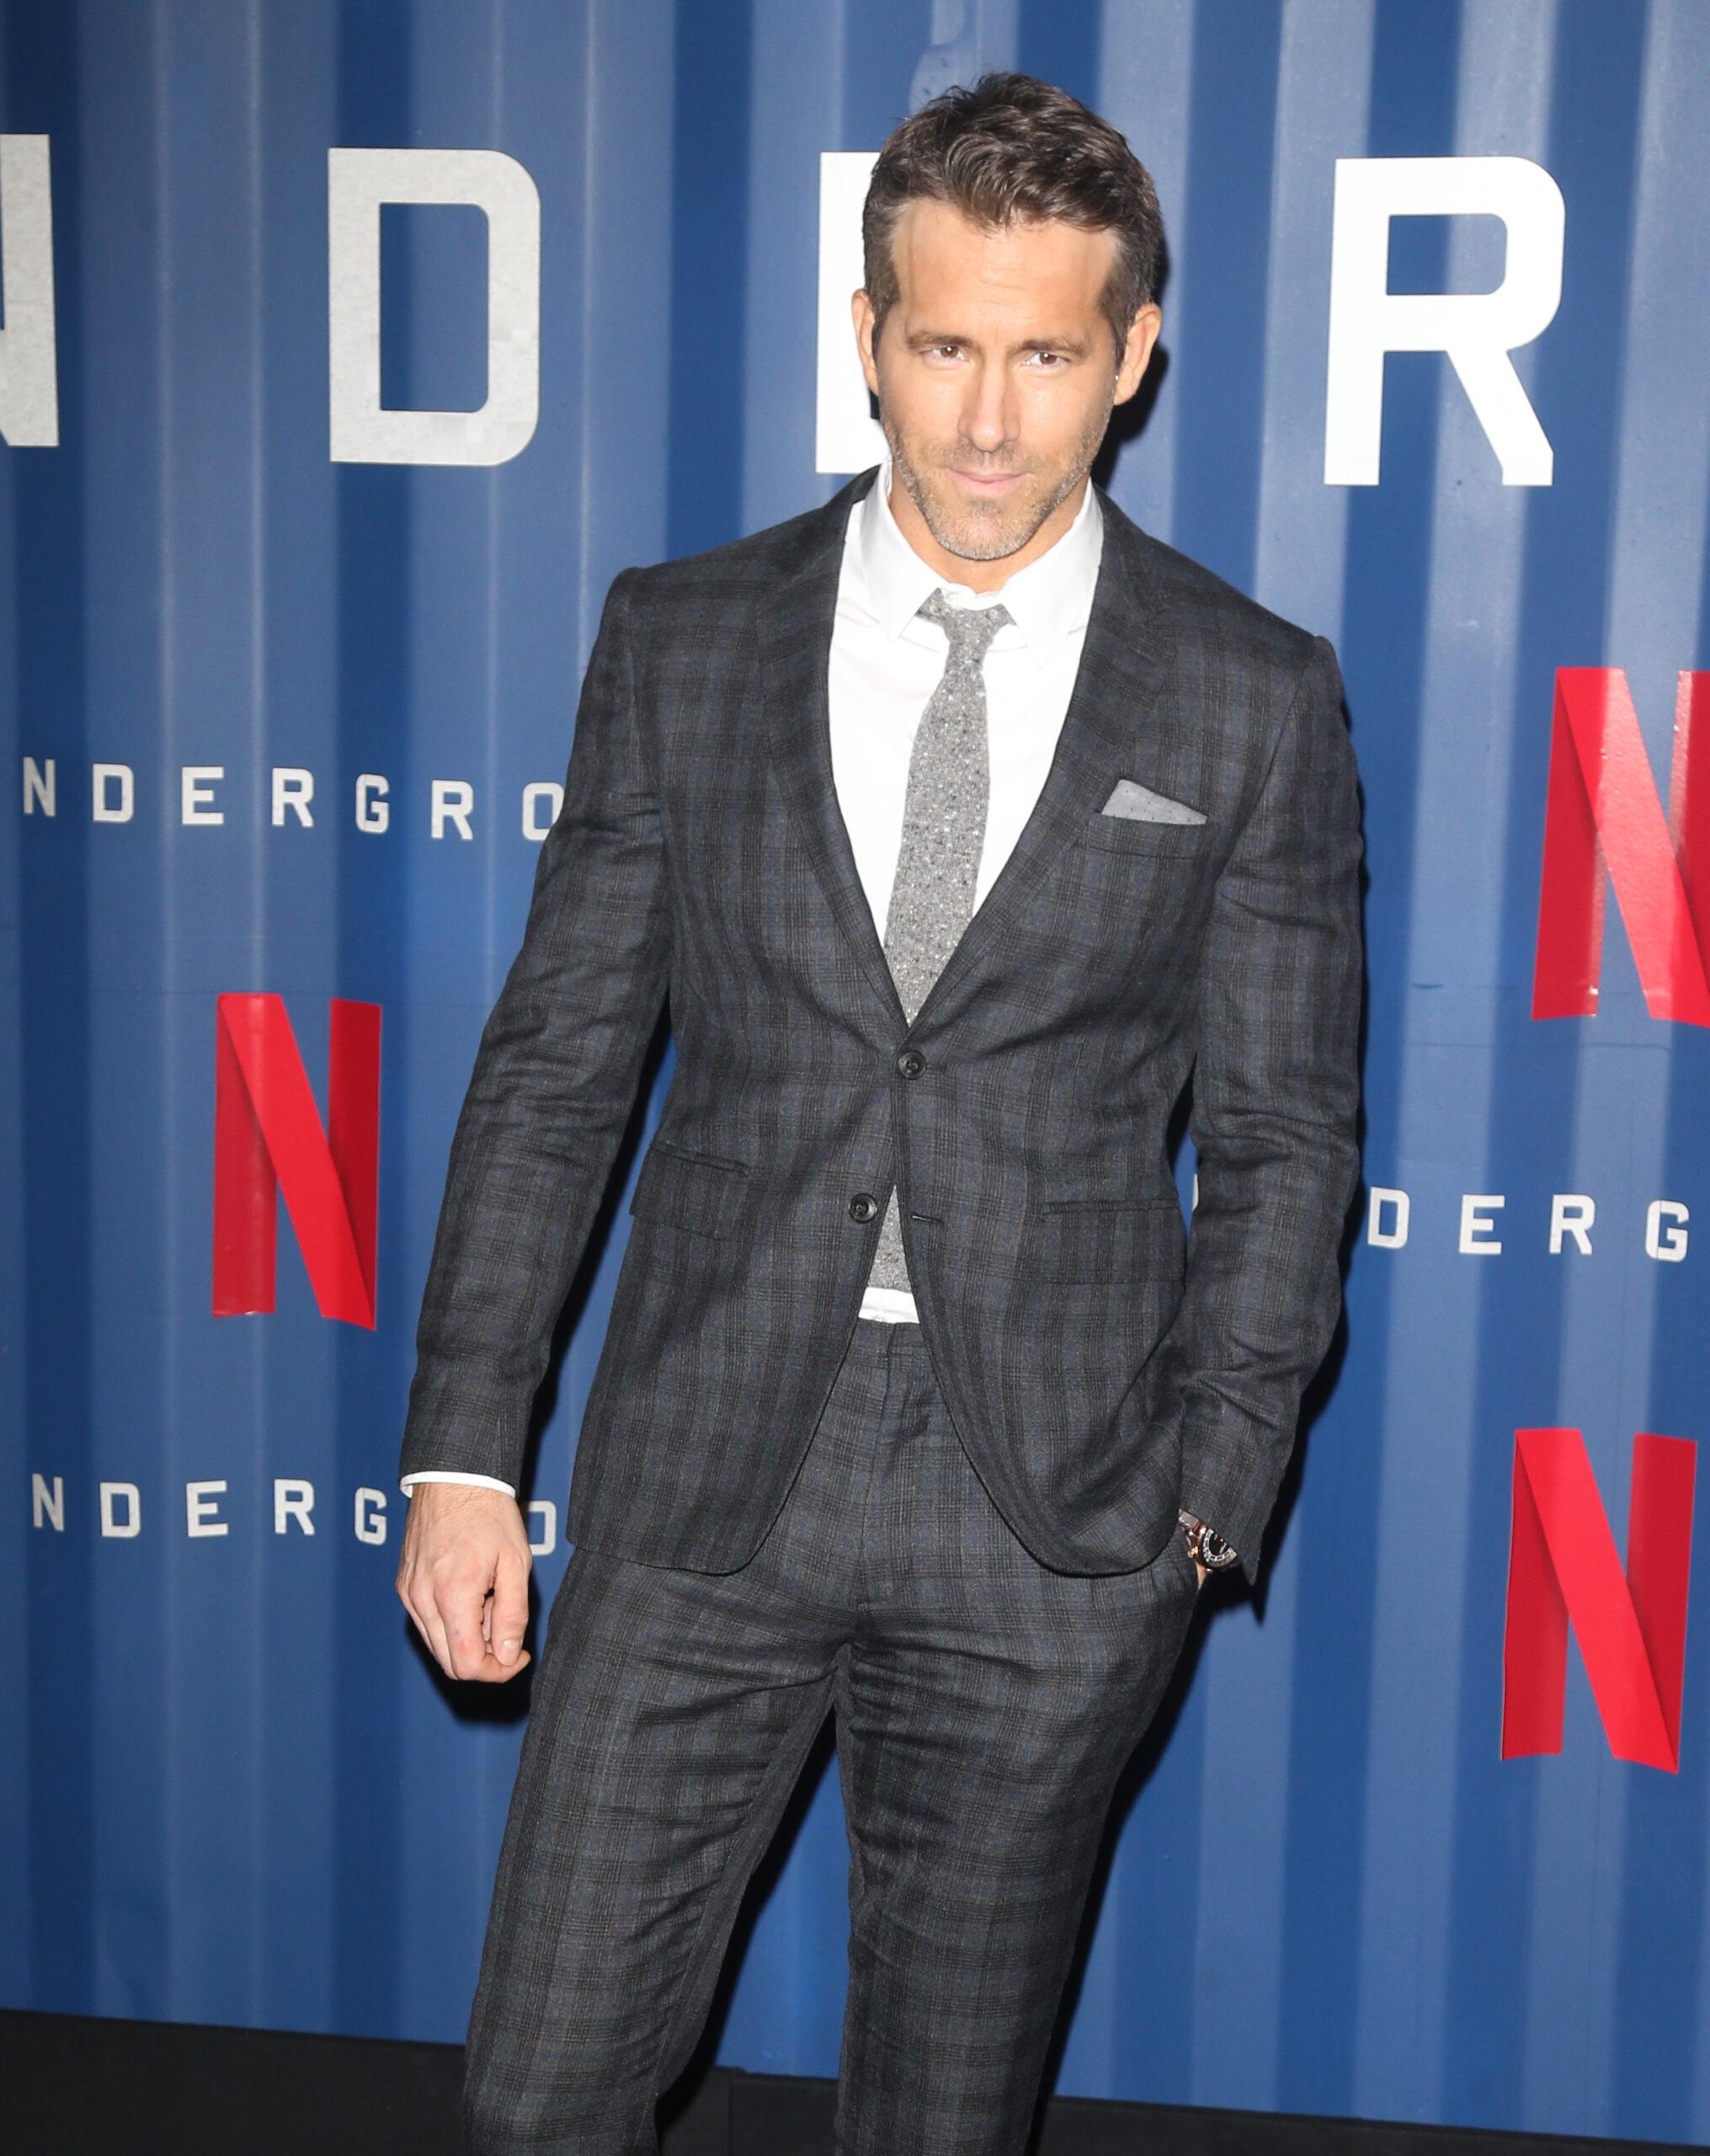 Ryan Reynold's childhood made him scared to have boys